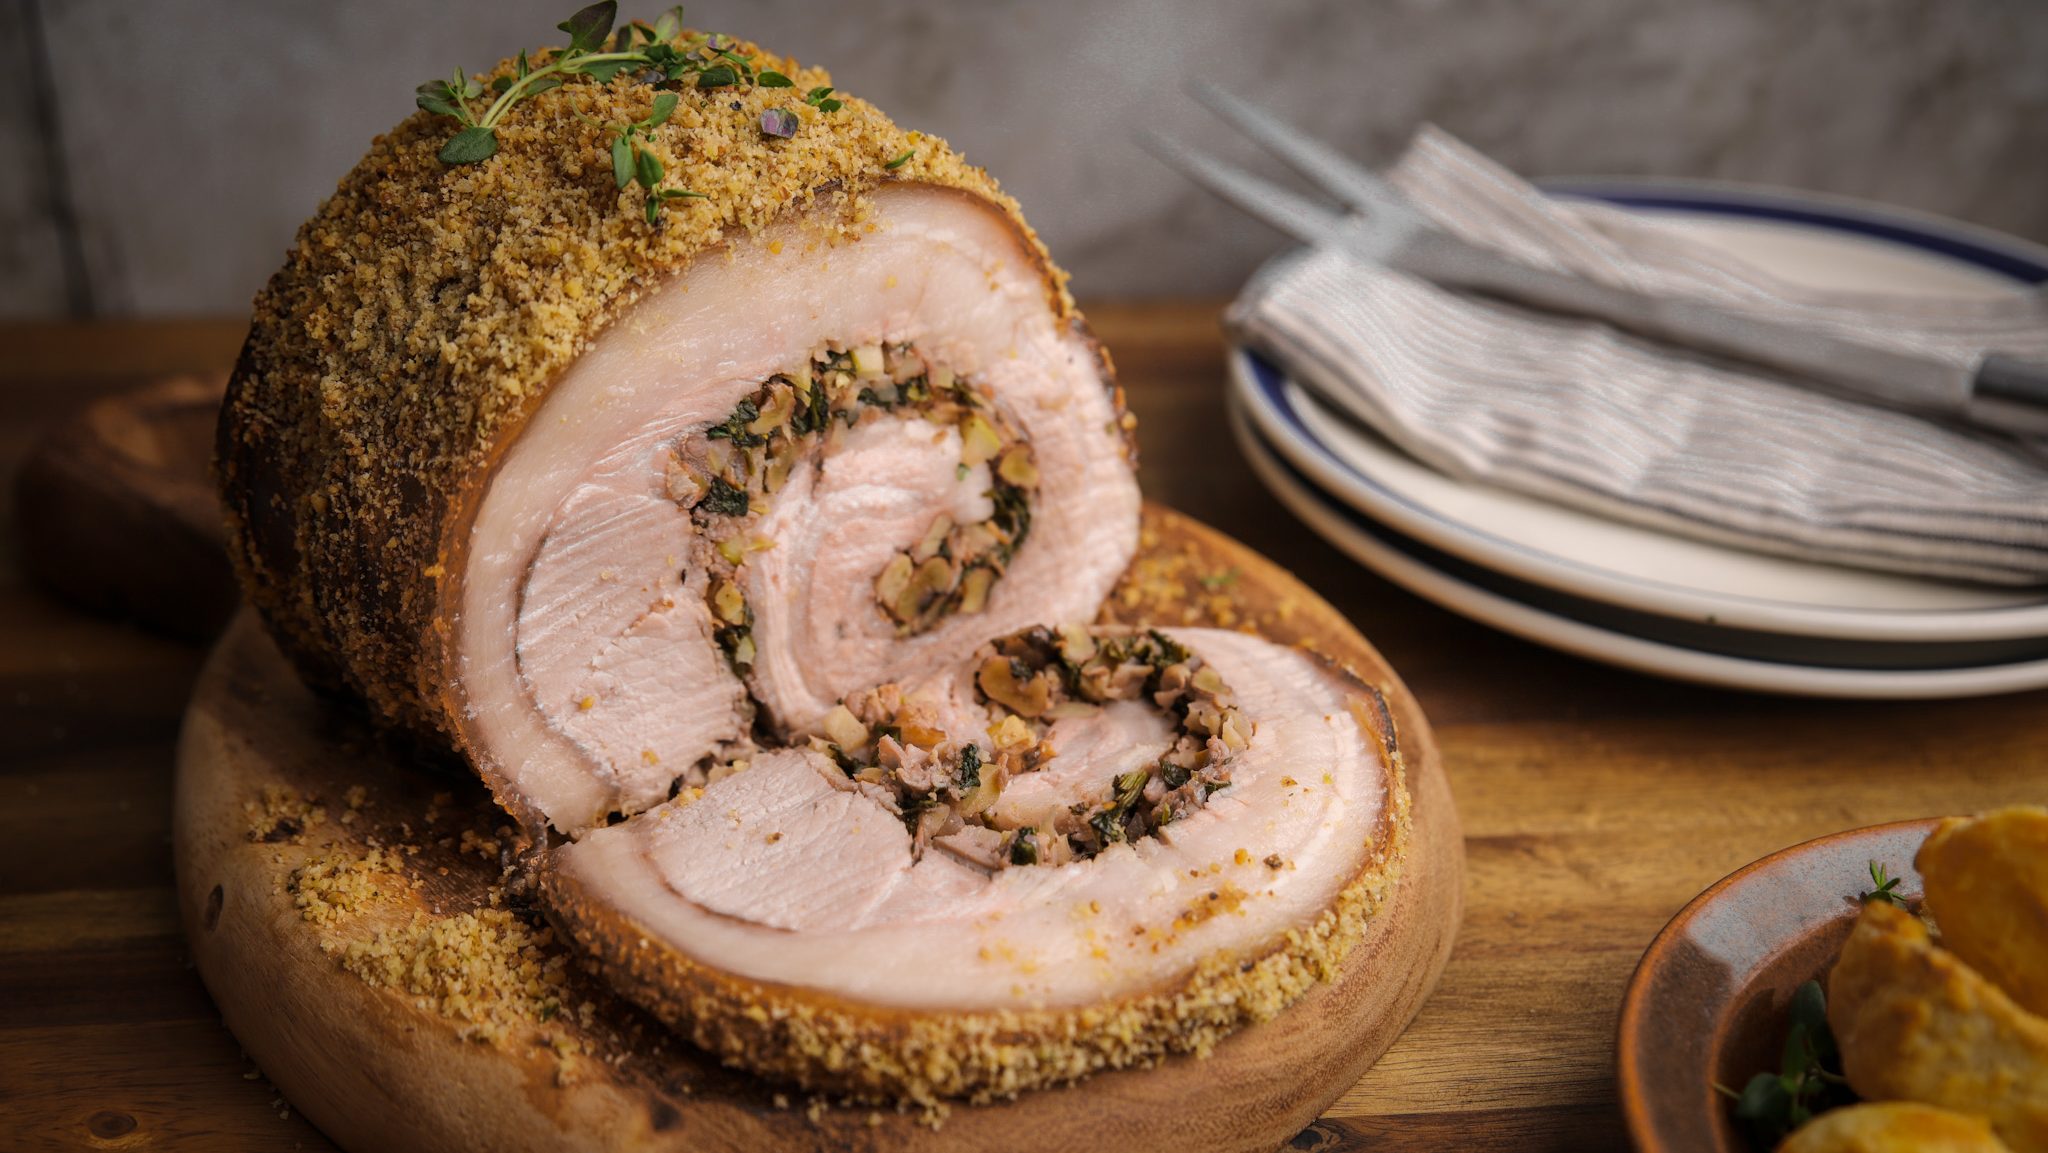 Roasted crumbed rolled pork filled with nutty crumbs on a board, sliced showing inside.